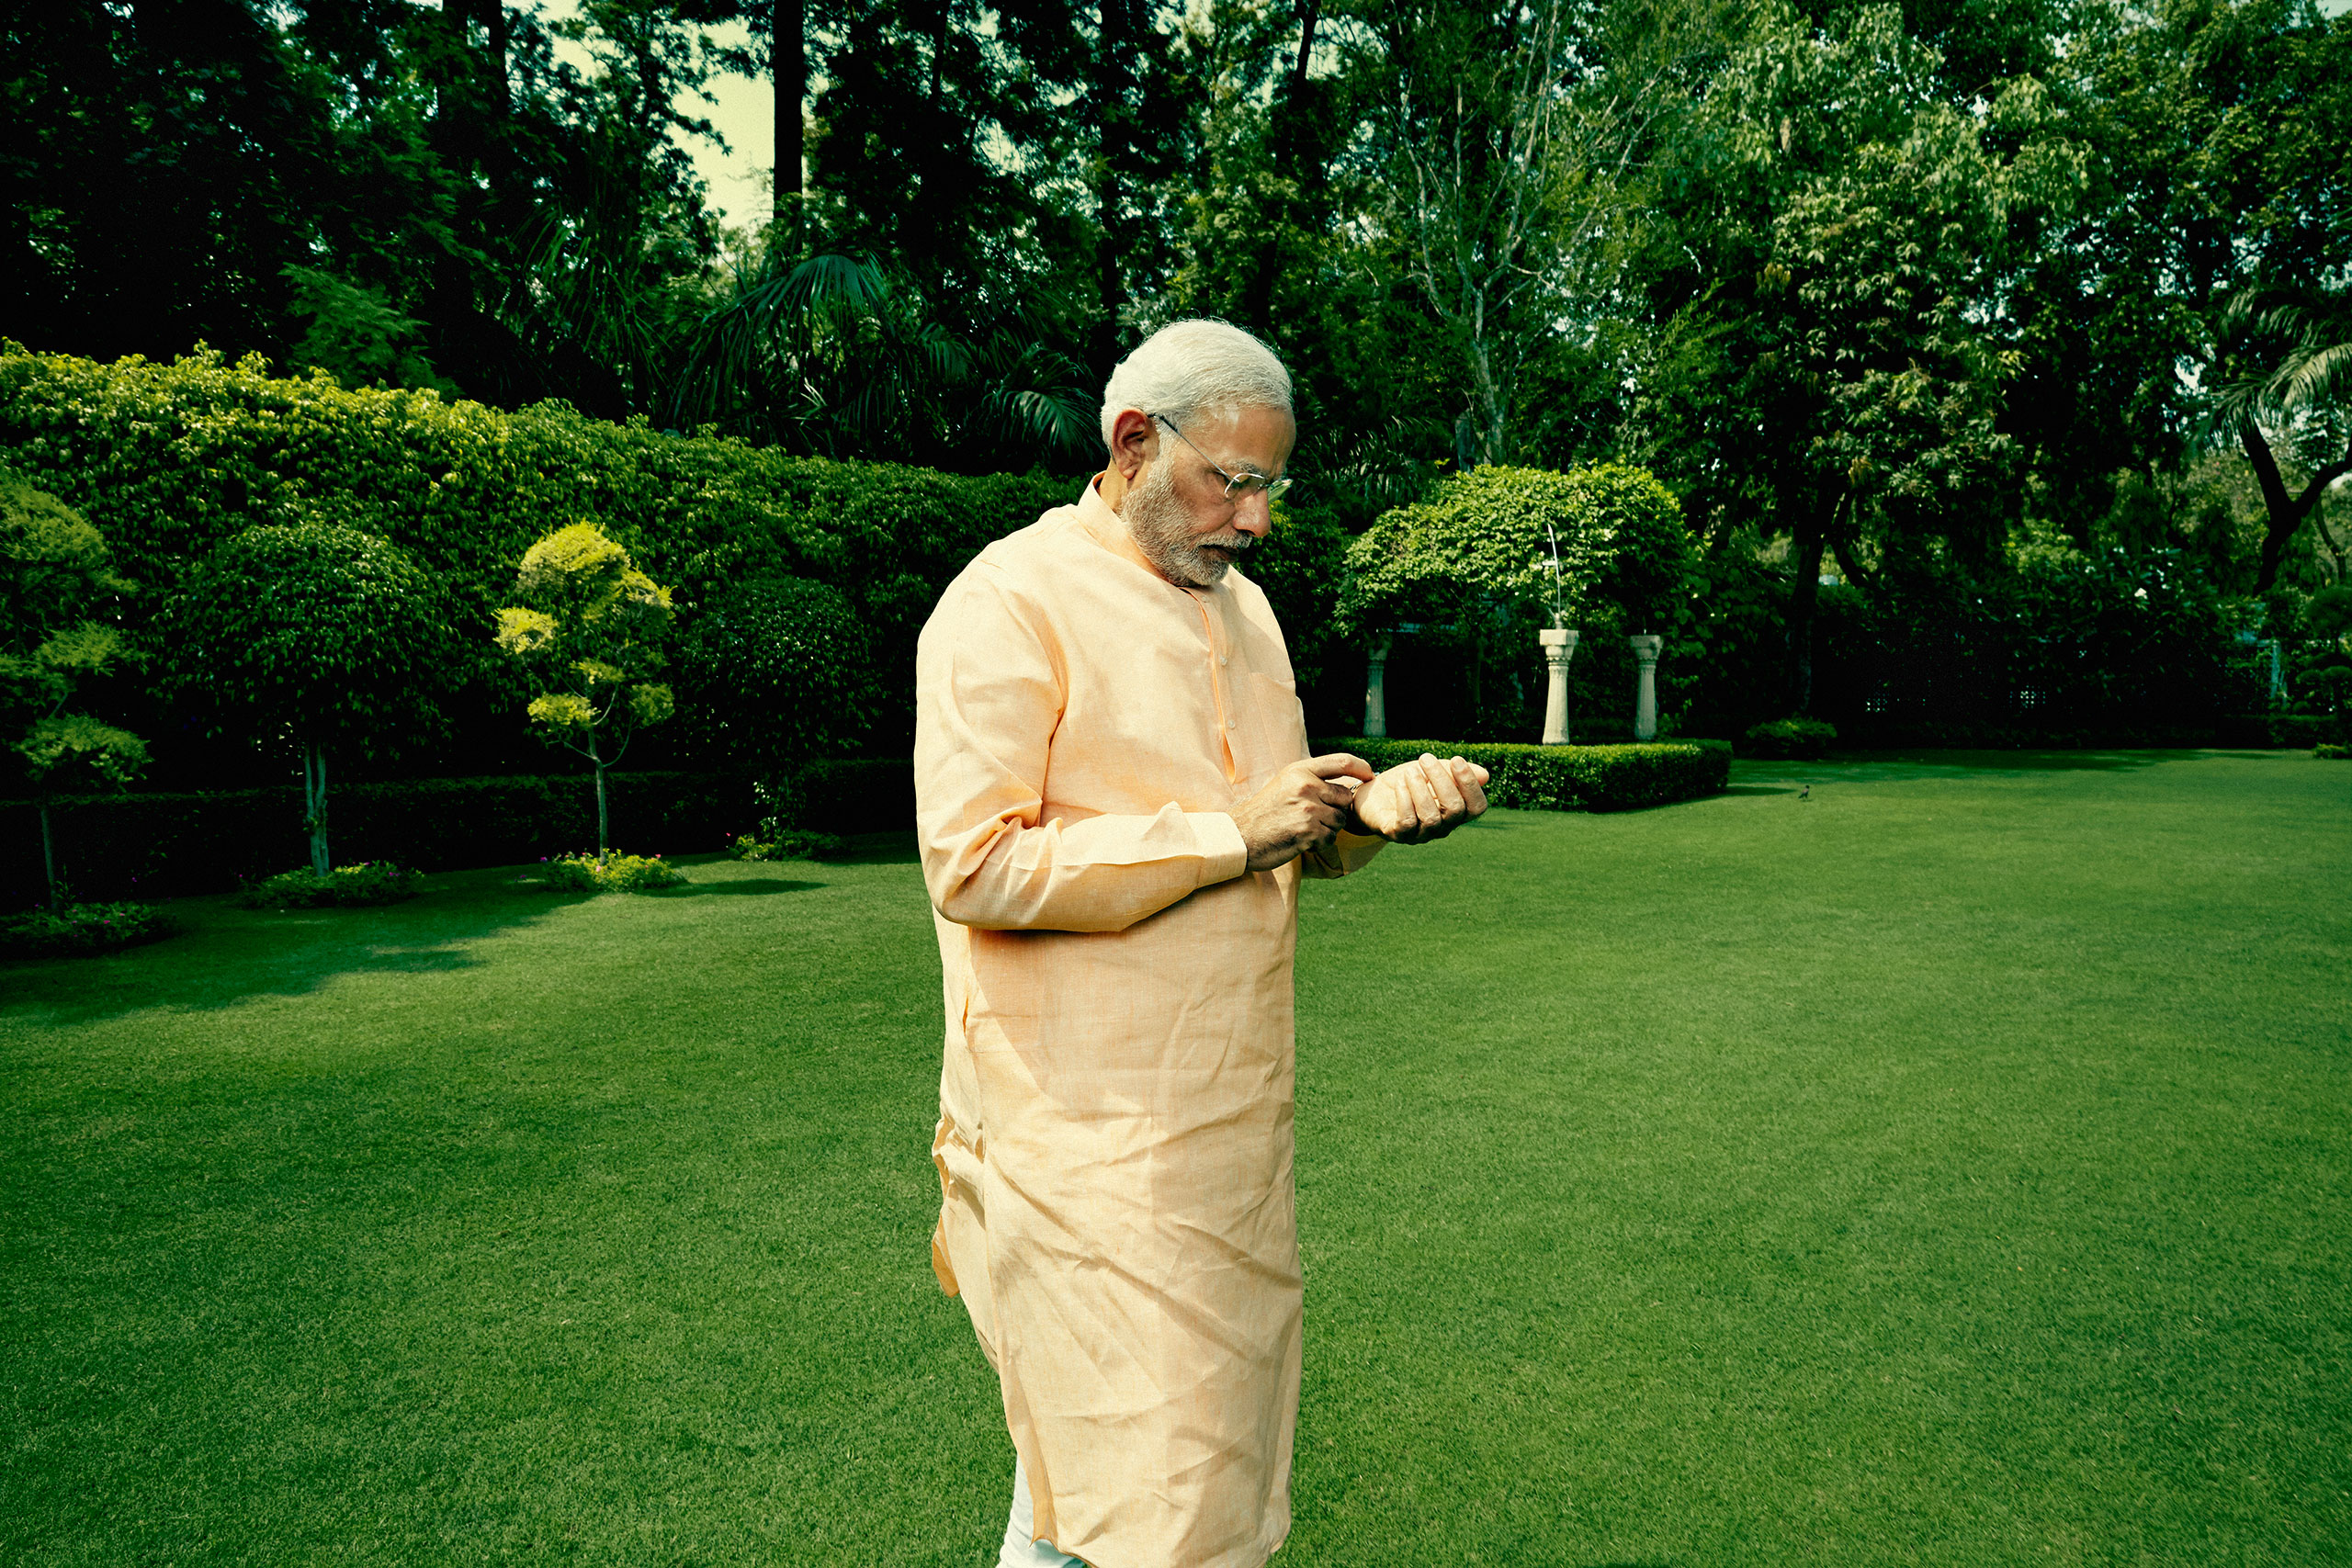 Indian Prime Minister Narendra Modi photographed at his residence in New Delhi, India, May 2, 2015.From  The Next Global Player.  May 18, 2015 issue.